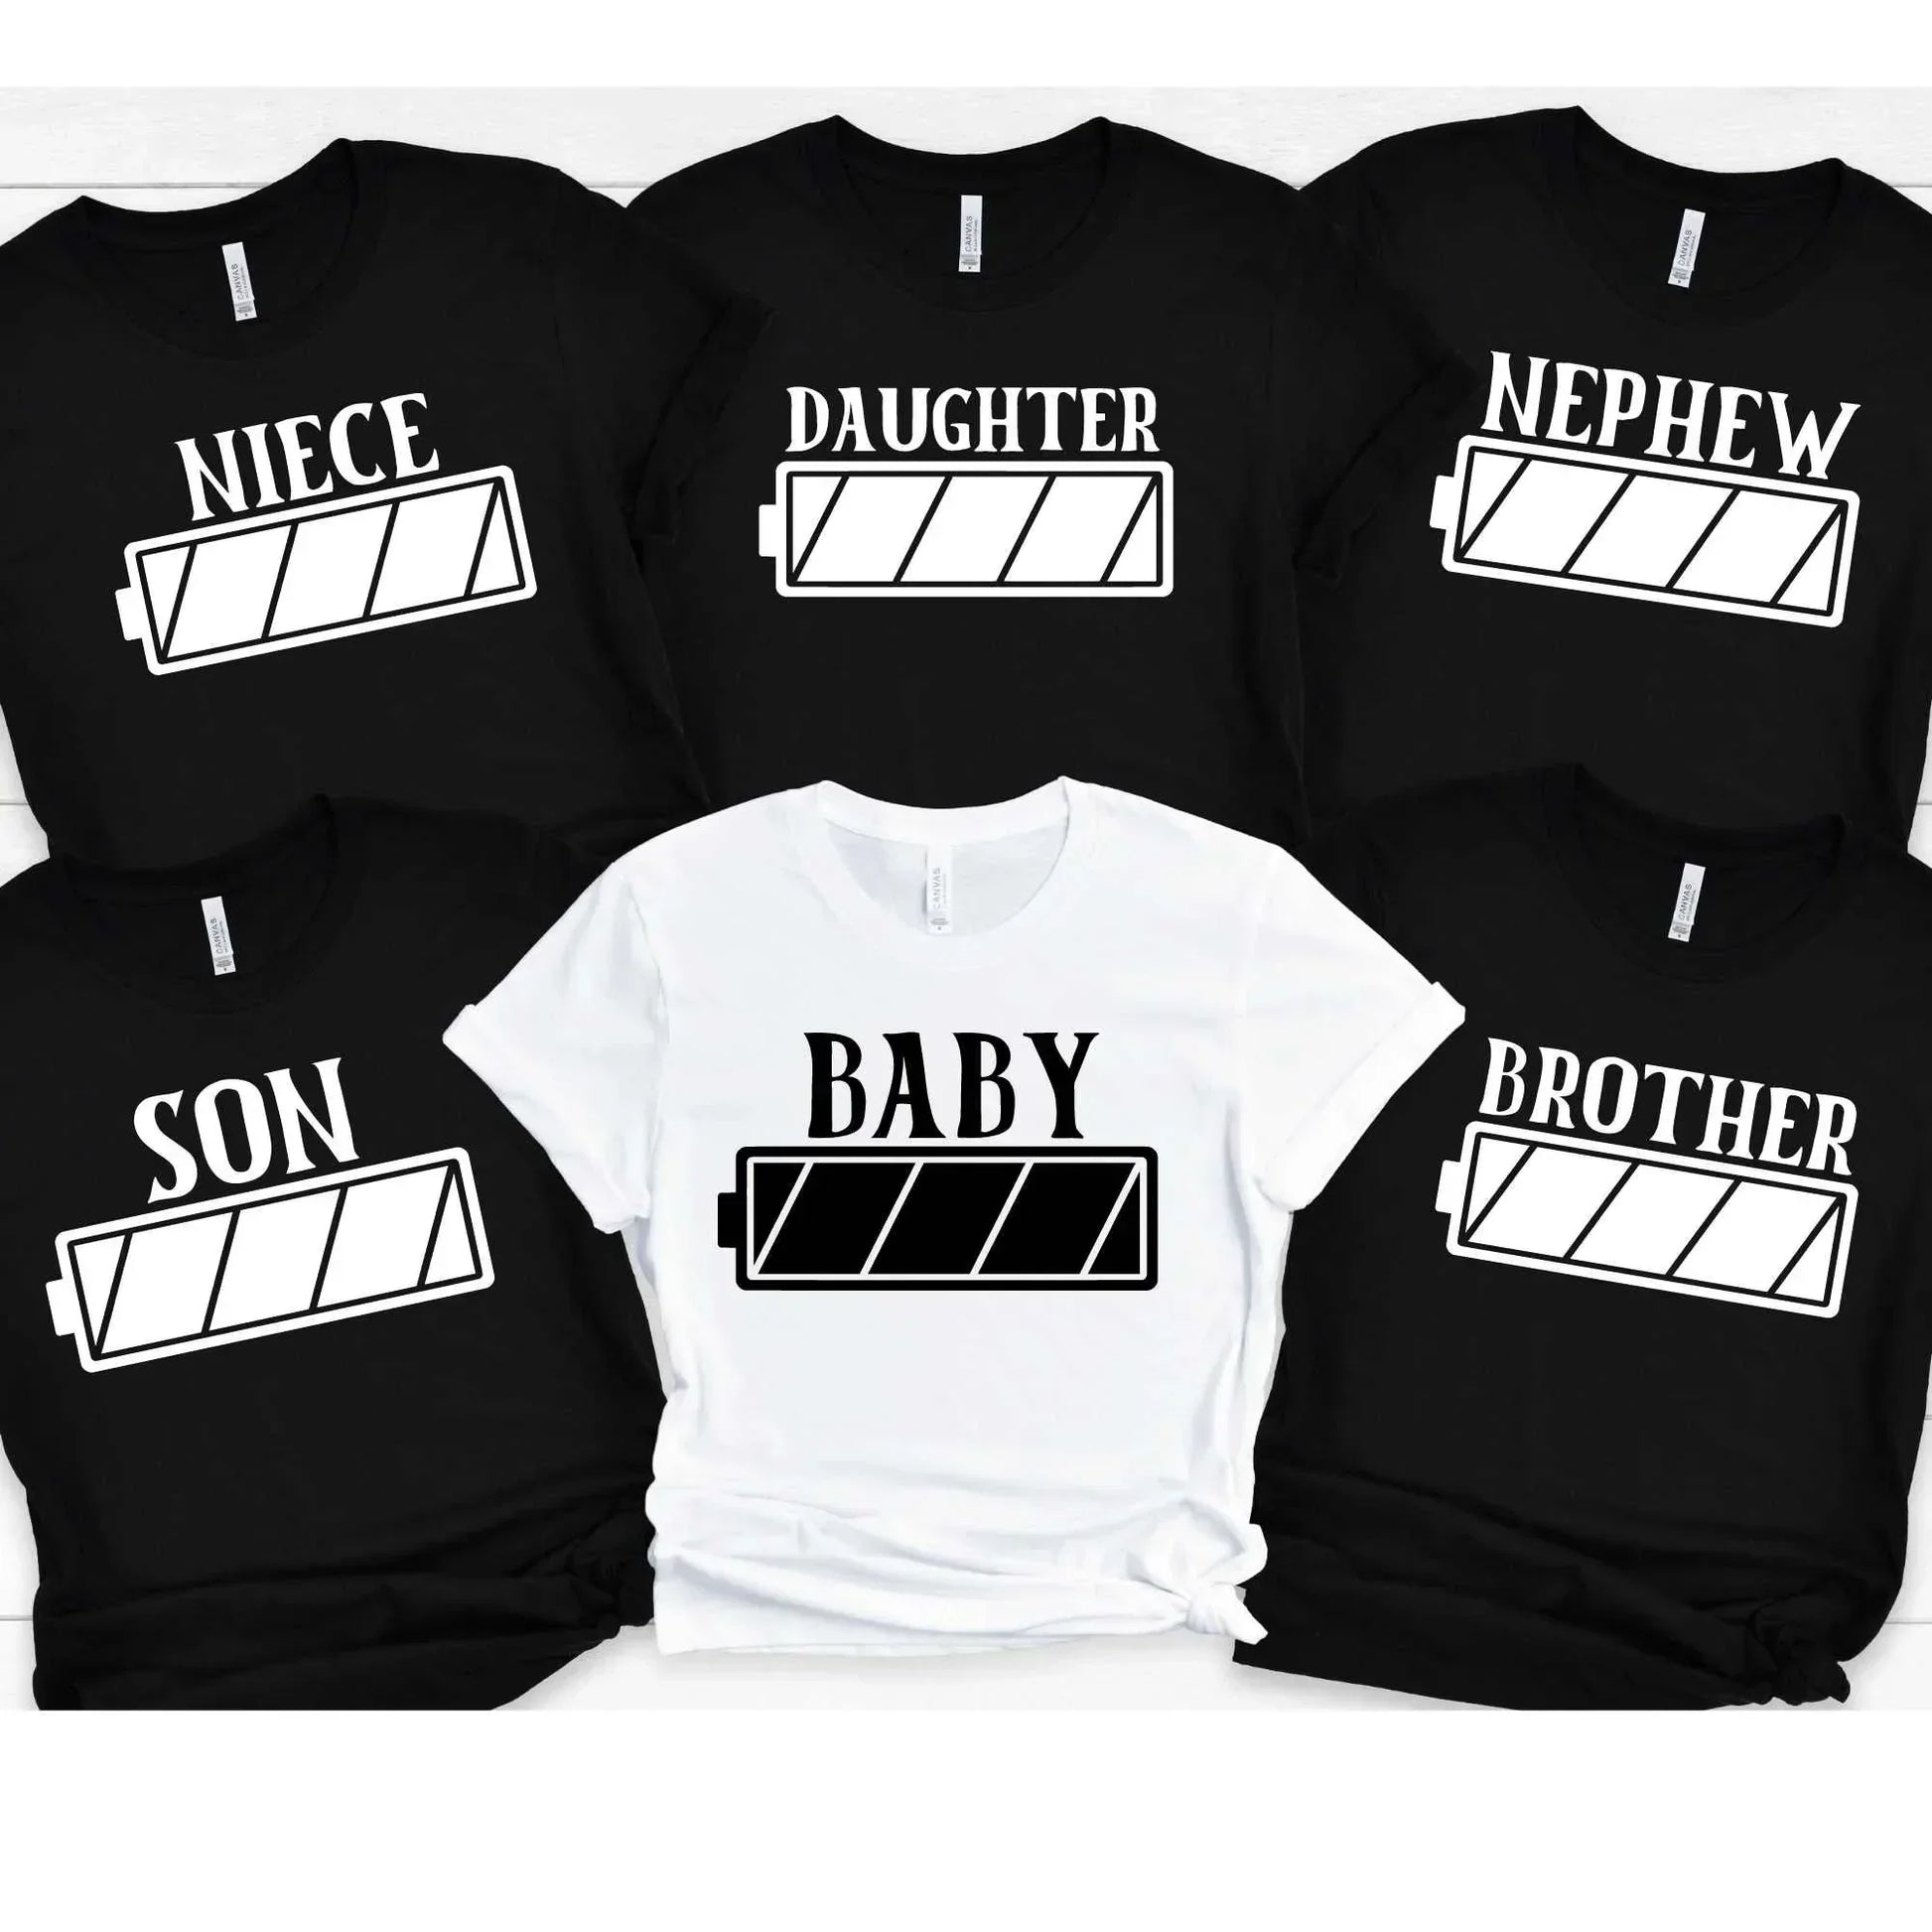 Family Matching Tees for Photos, Pregnancy Reveal Shirts, Baby Announcement Photographs, Baby Shower Gifts, 1st Time Parents & Grandparents HMDesignStudioUS